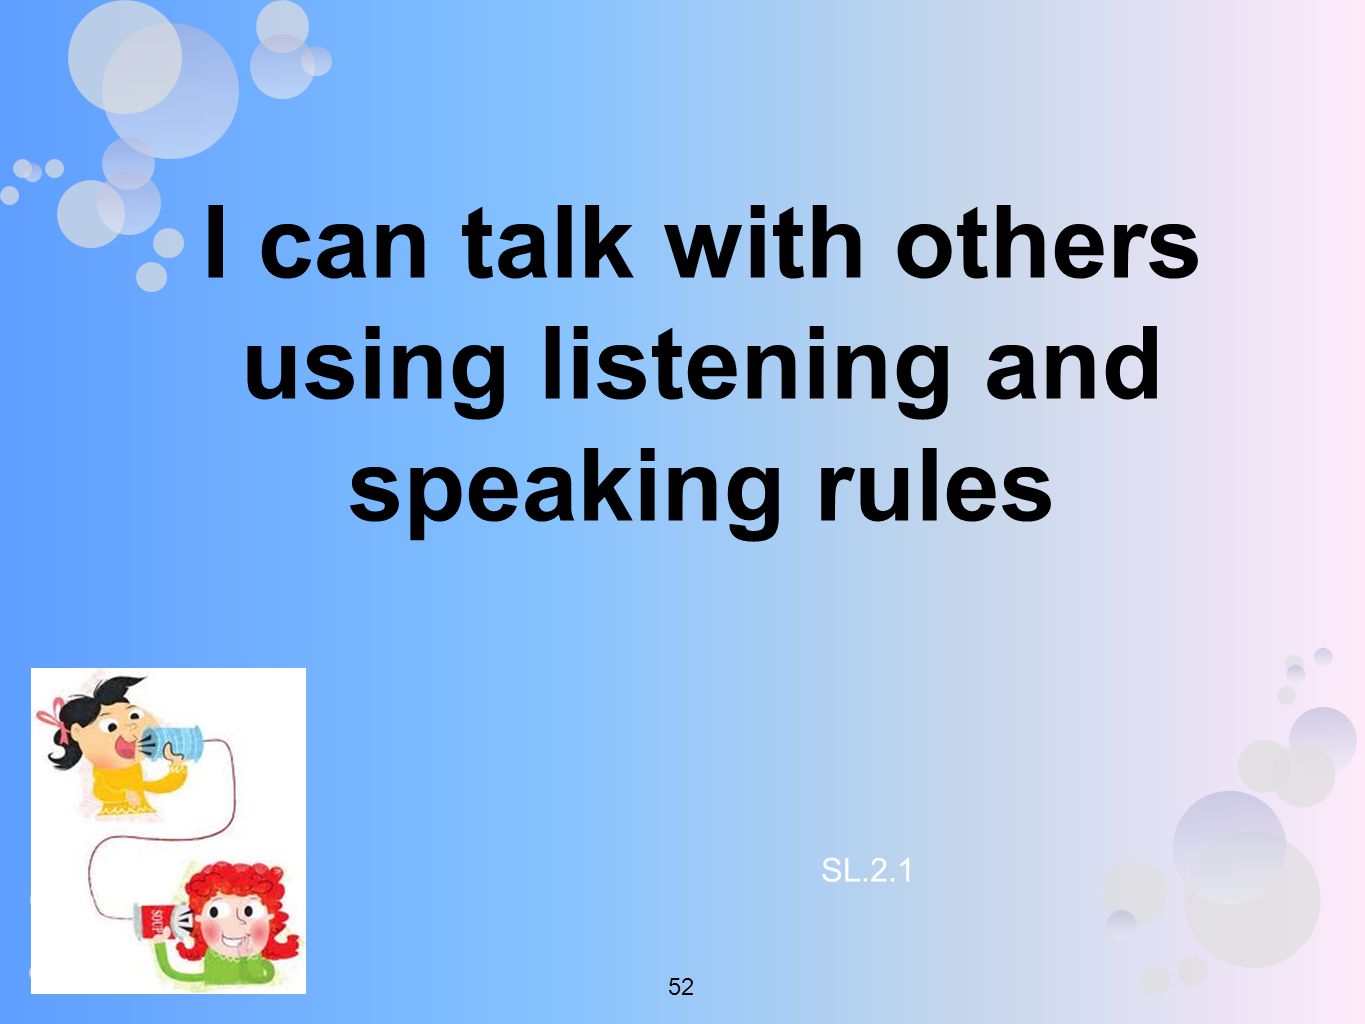 I can talk with others using listening and speaking rules SL